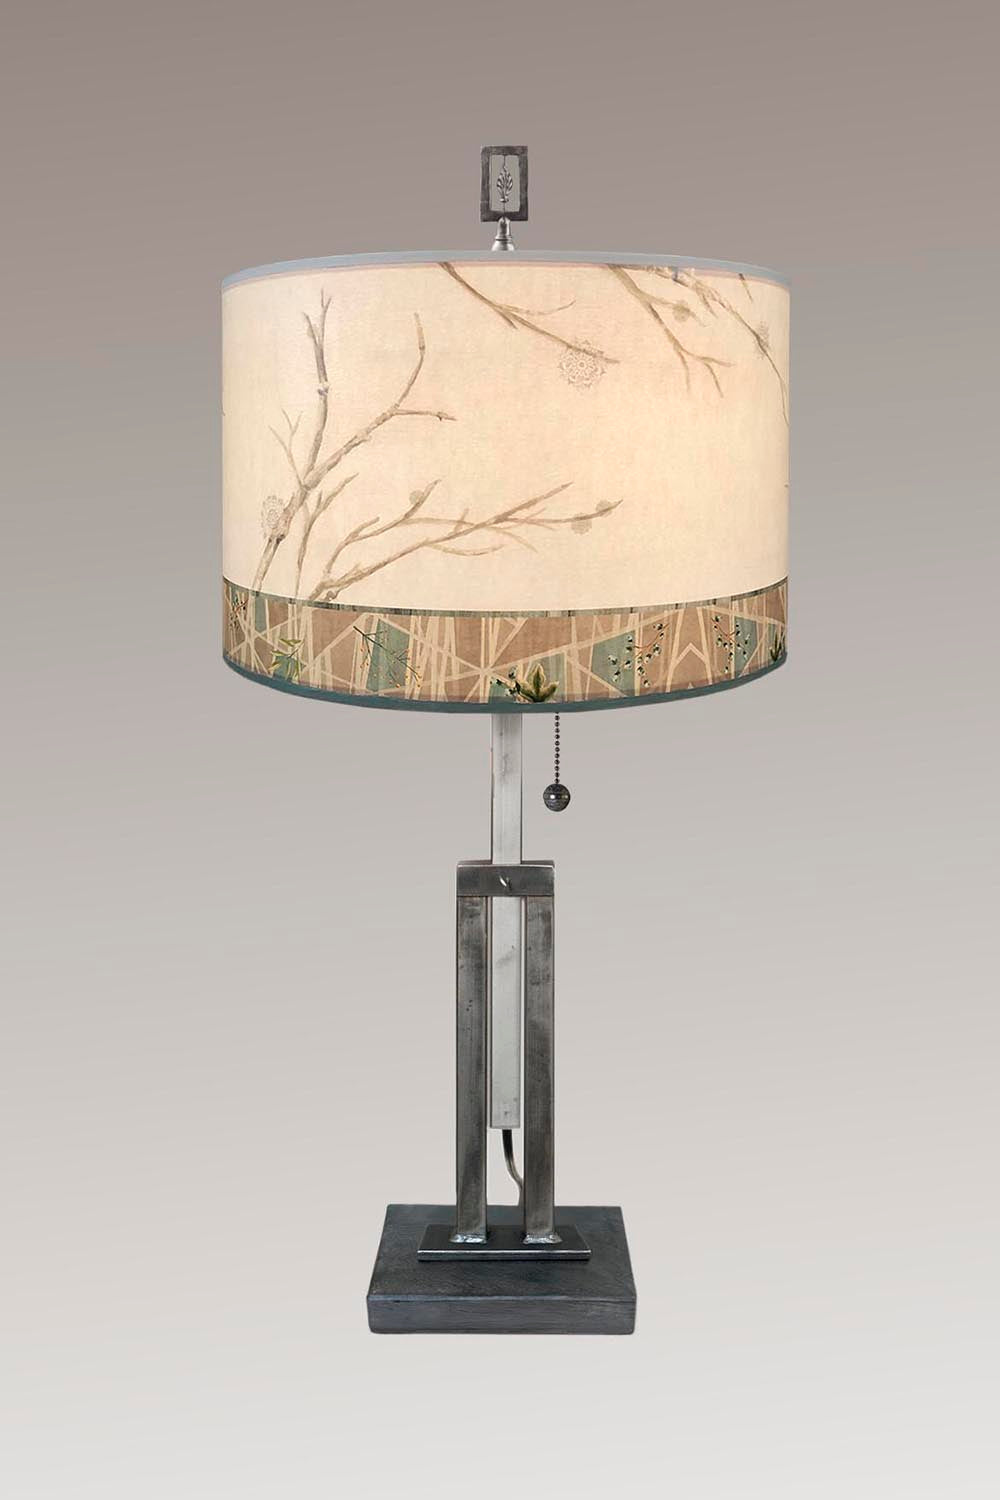 Janna Ugone & Co Table Lamps Adjustable-Height Steel Table Lamp with Large Drum Shade in Prism Branch